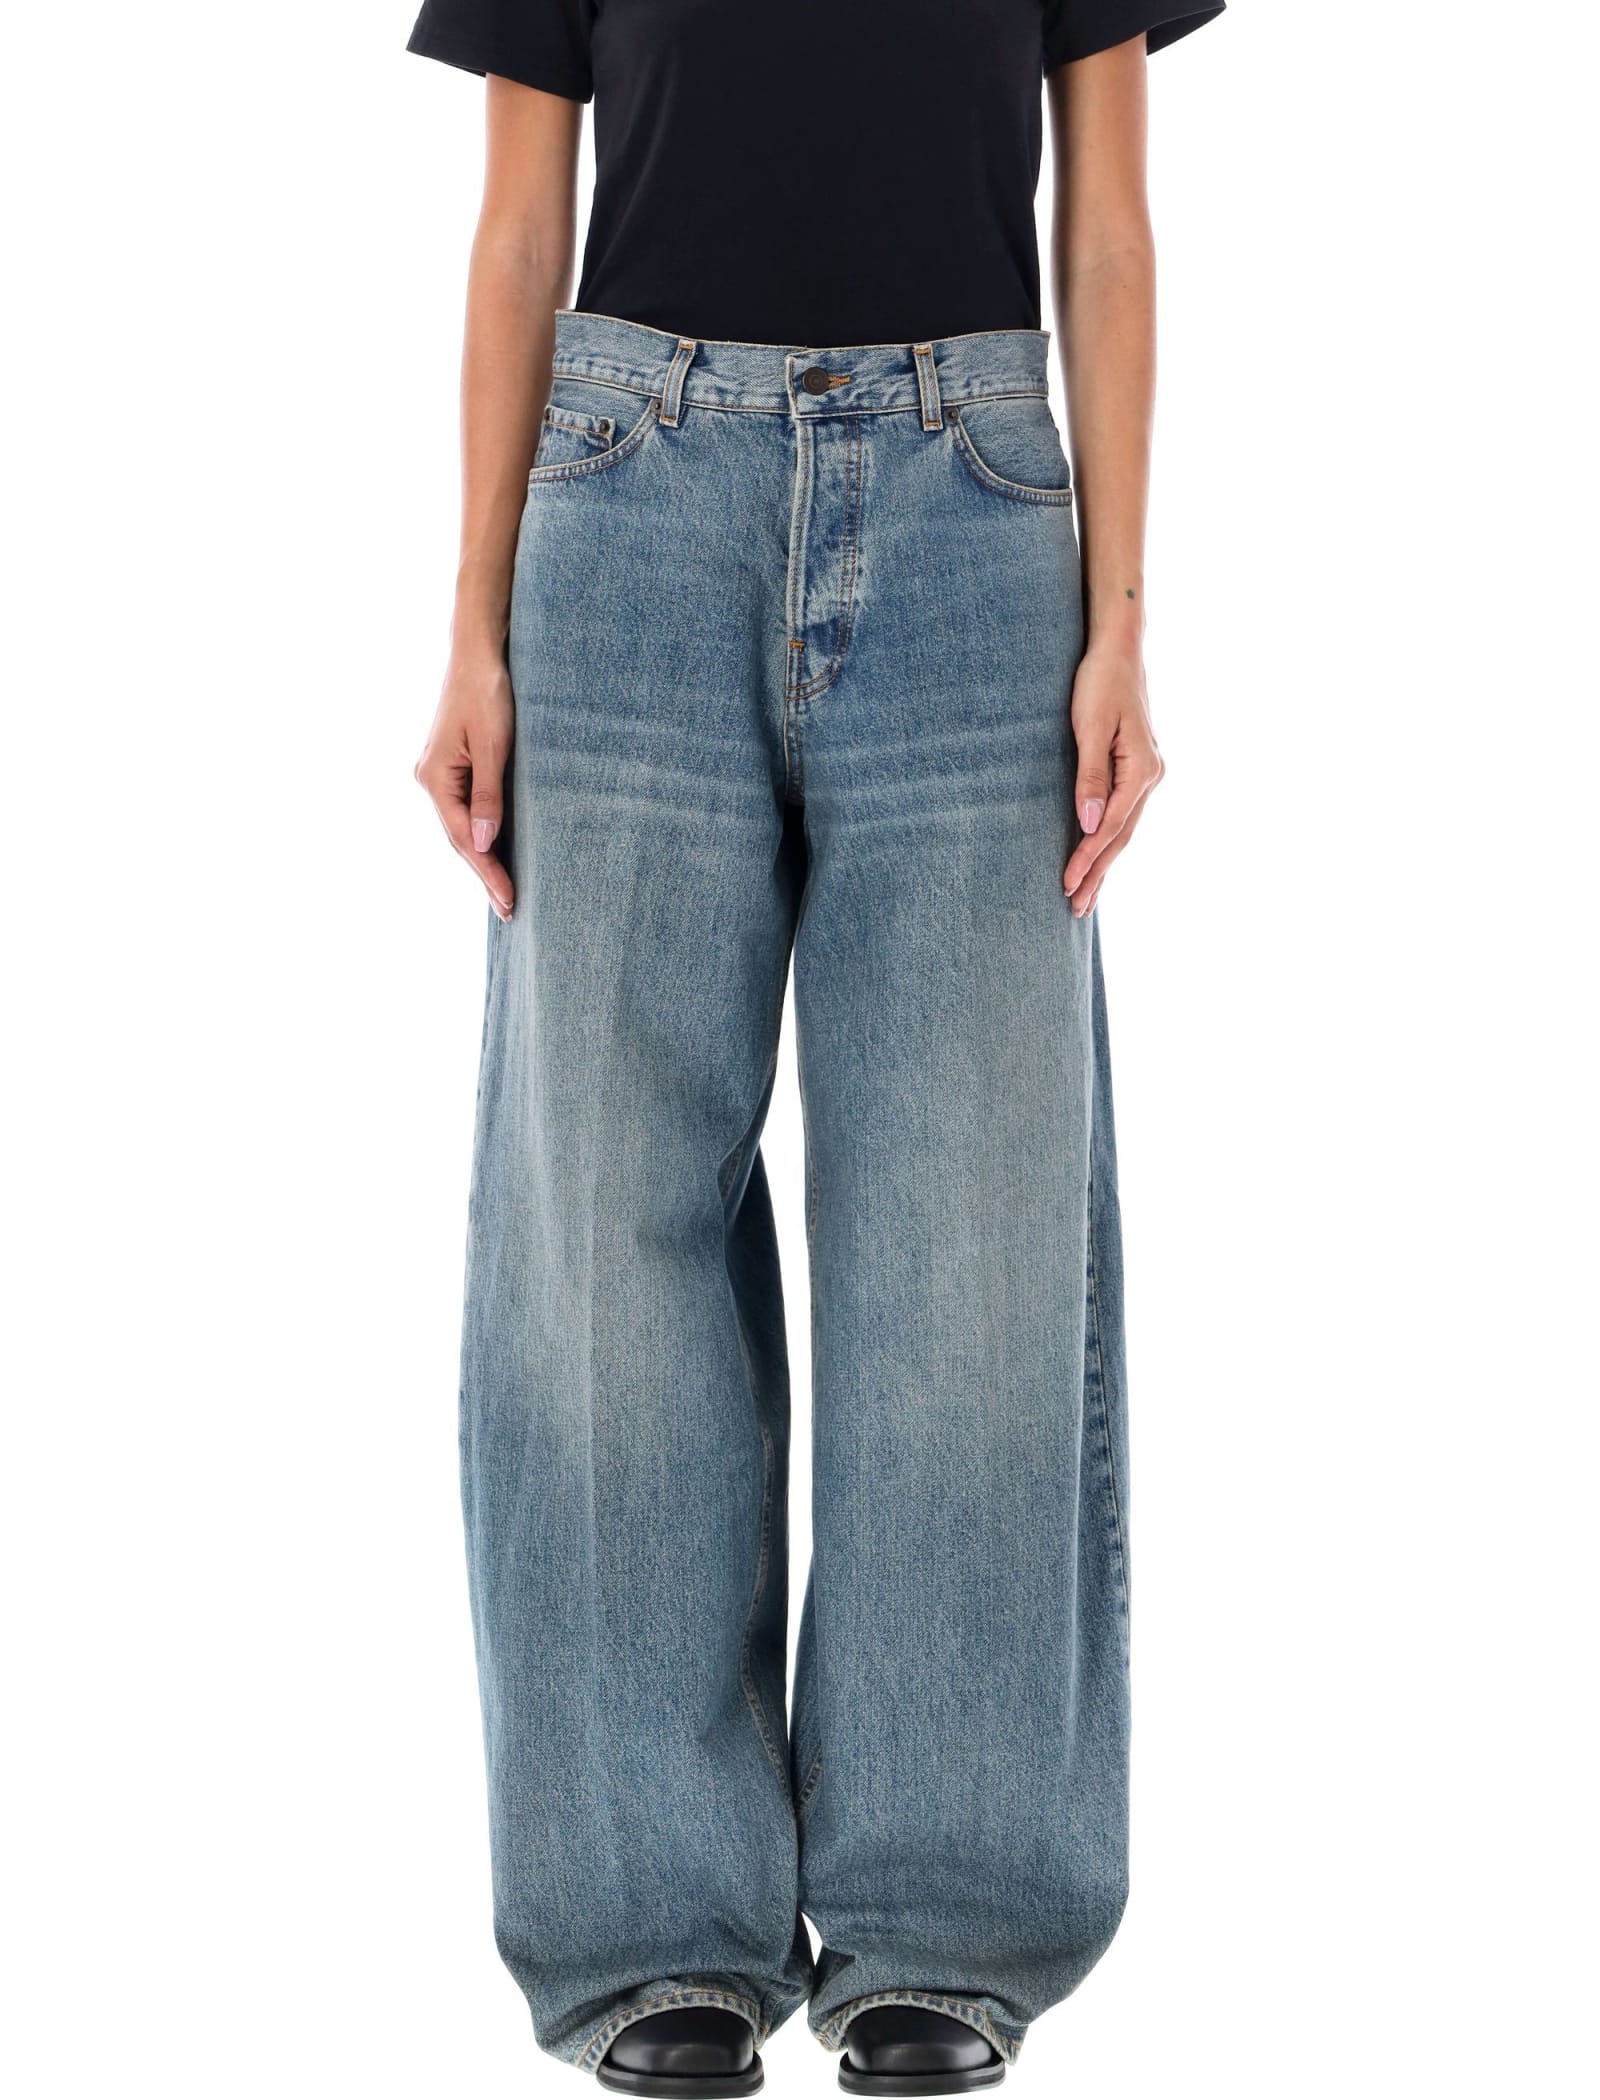 Bethany Oil Blue Jeans